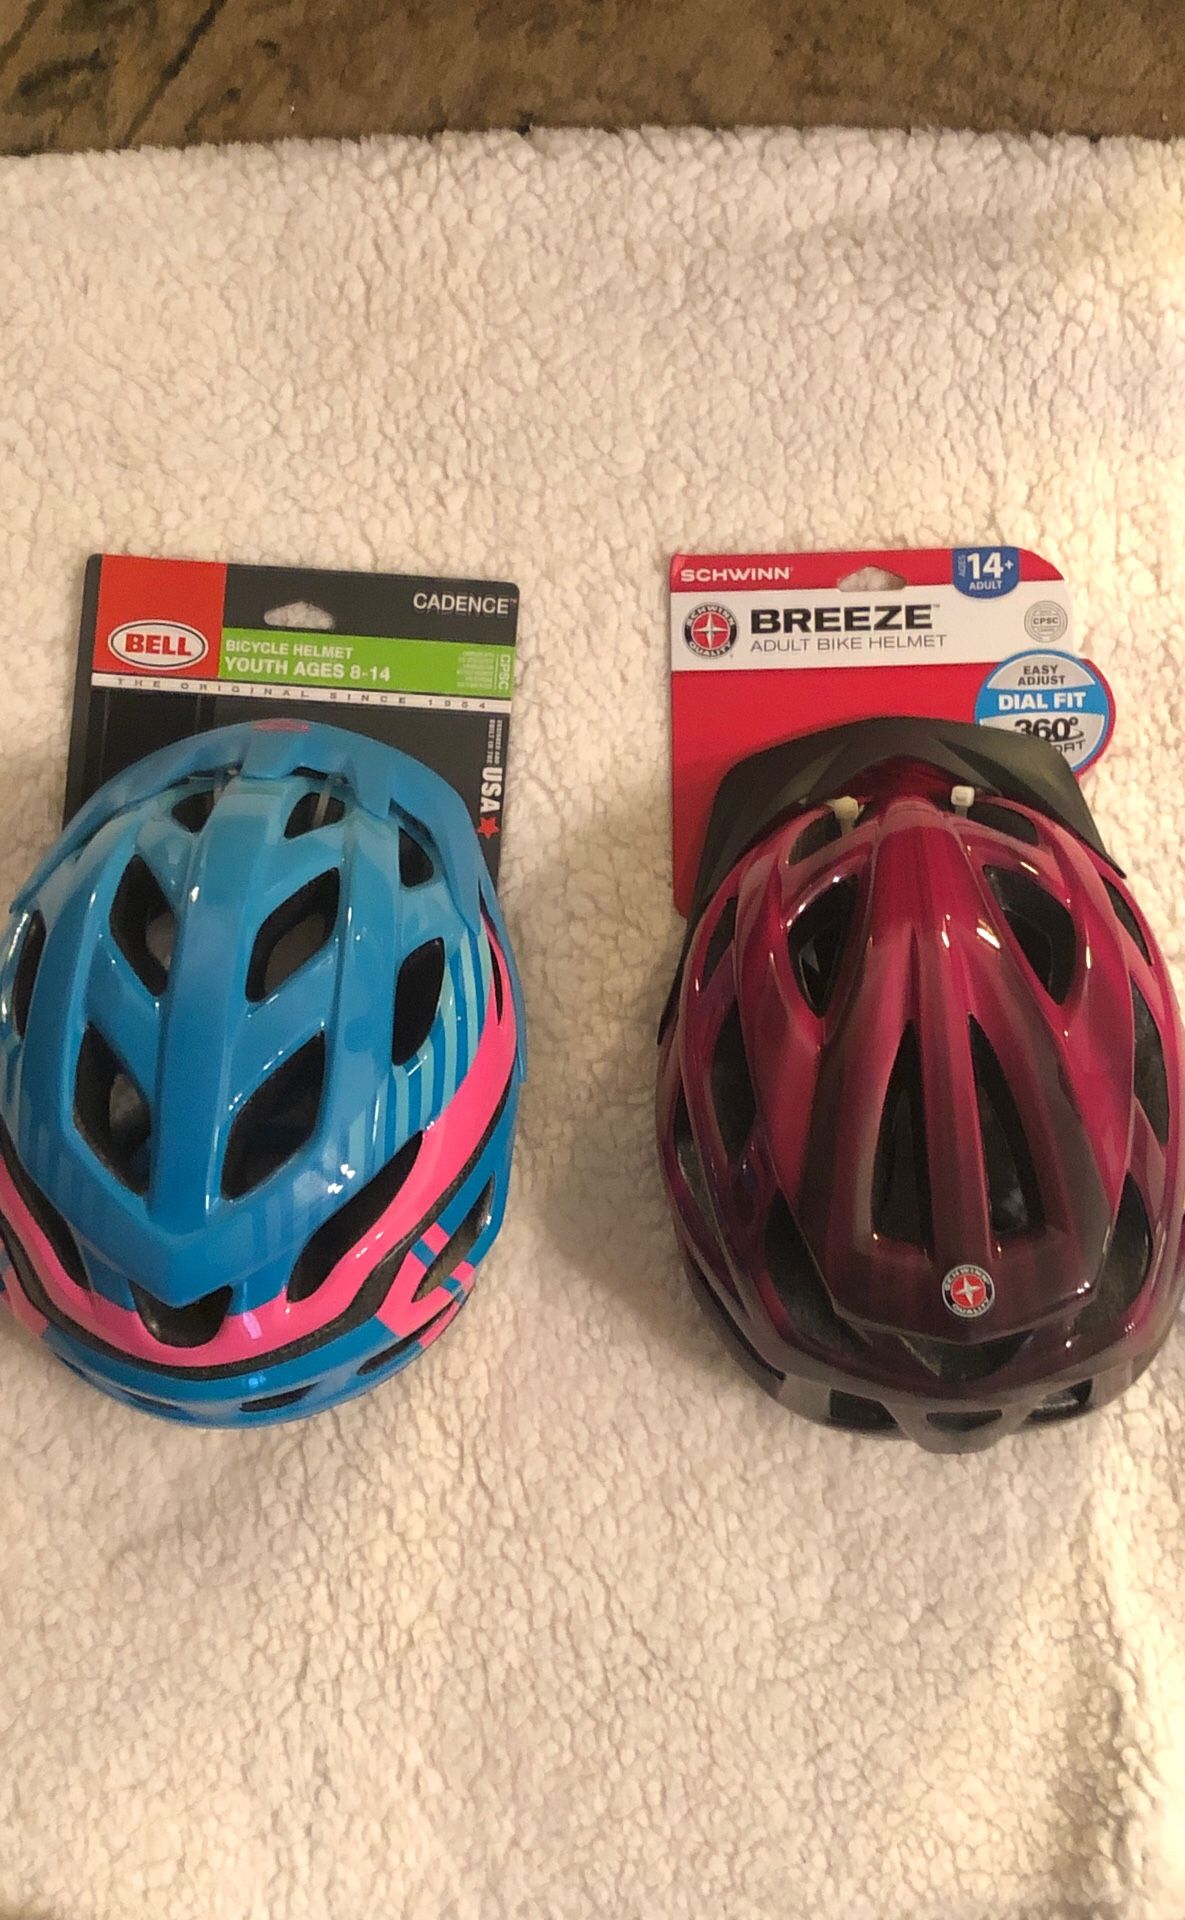 1: Bell Cadence Bicycle helmet ages 8-14 is the blue one. The other is a Breeze adult helmet ages 14 and up.